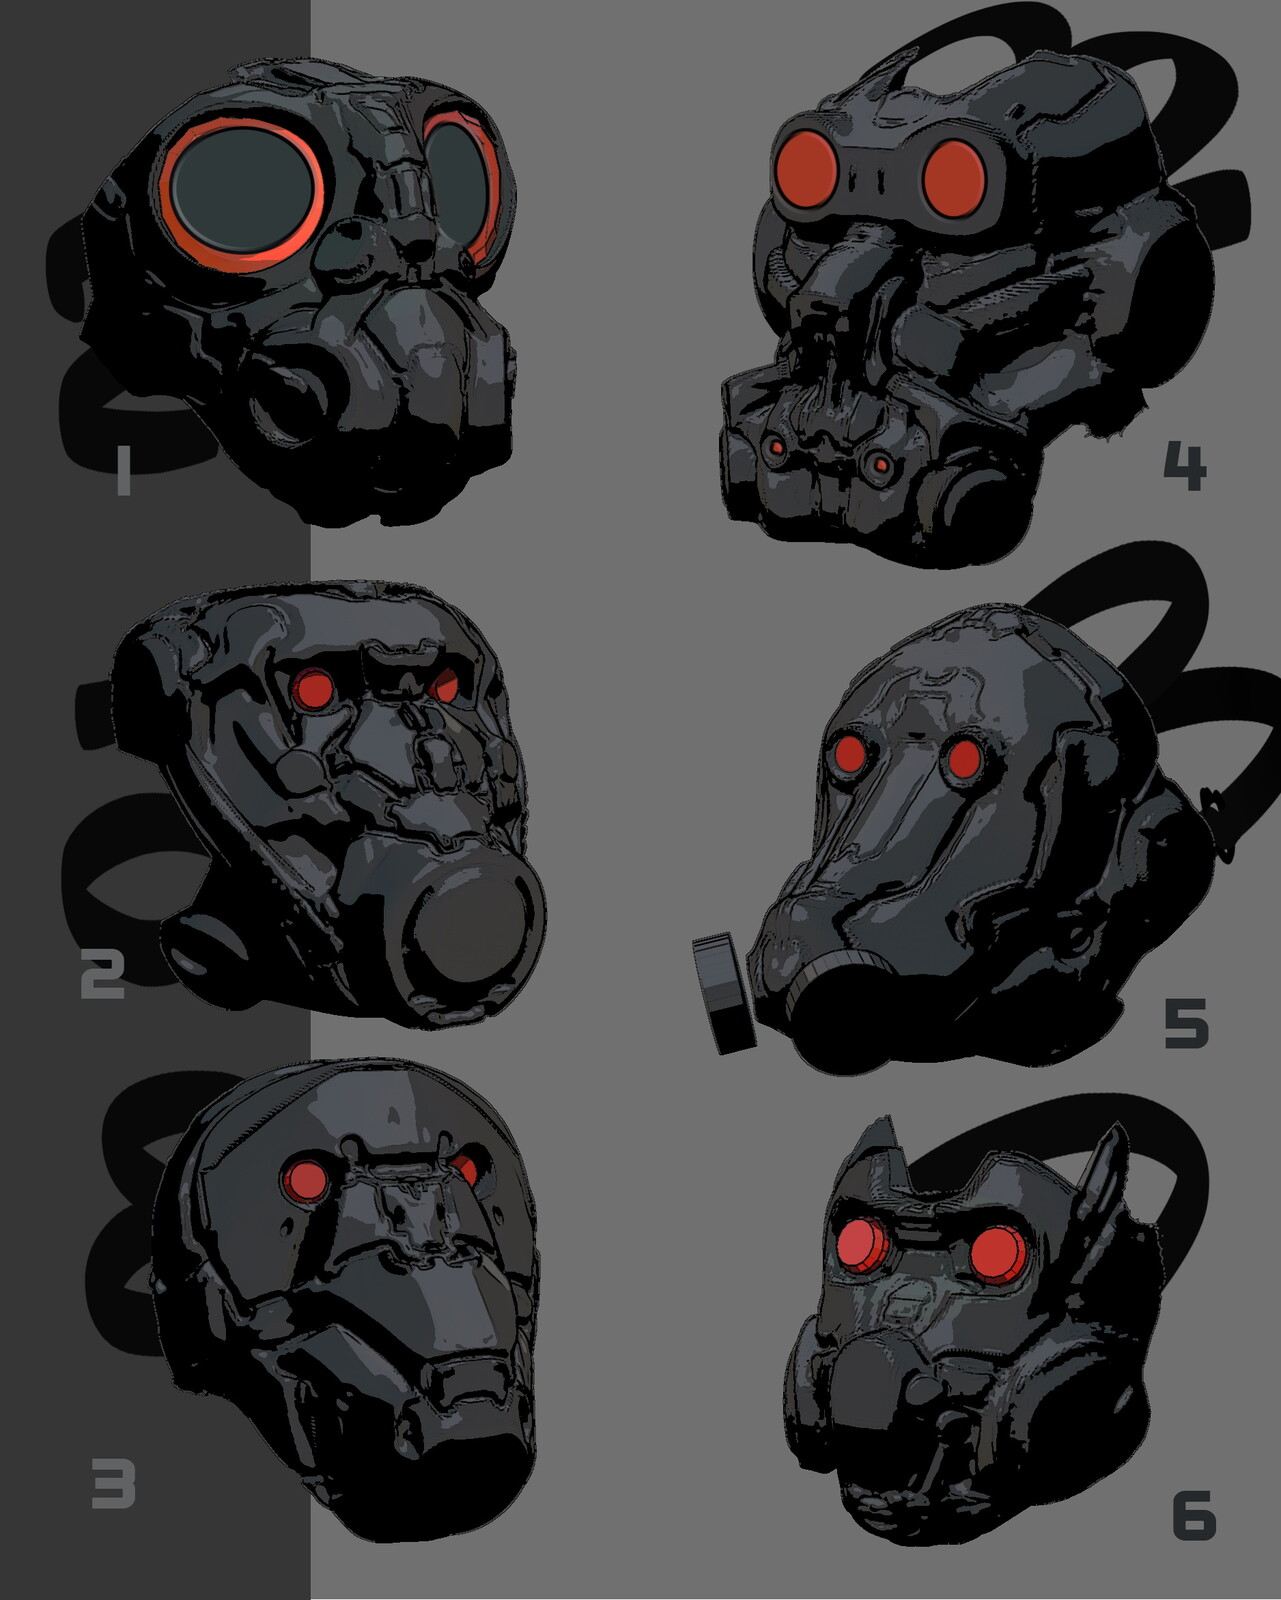 Initial 3D Concepts. Number 4 Was Voted.